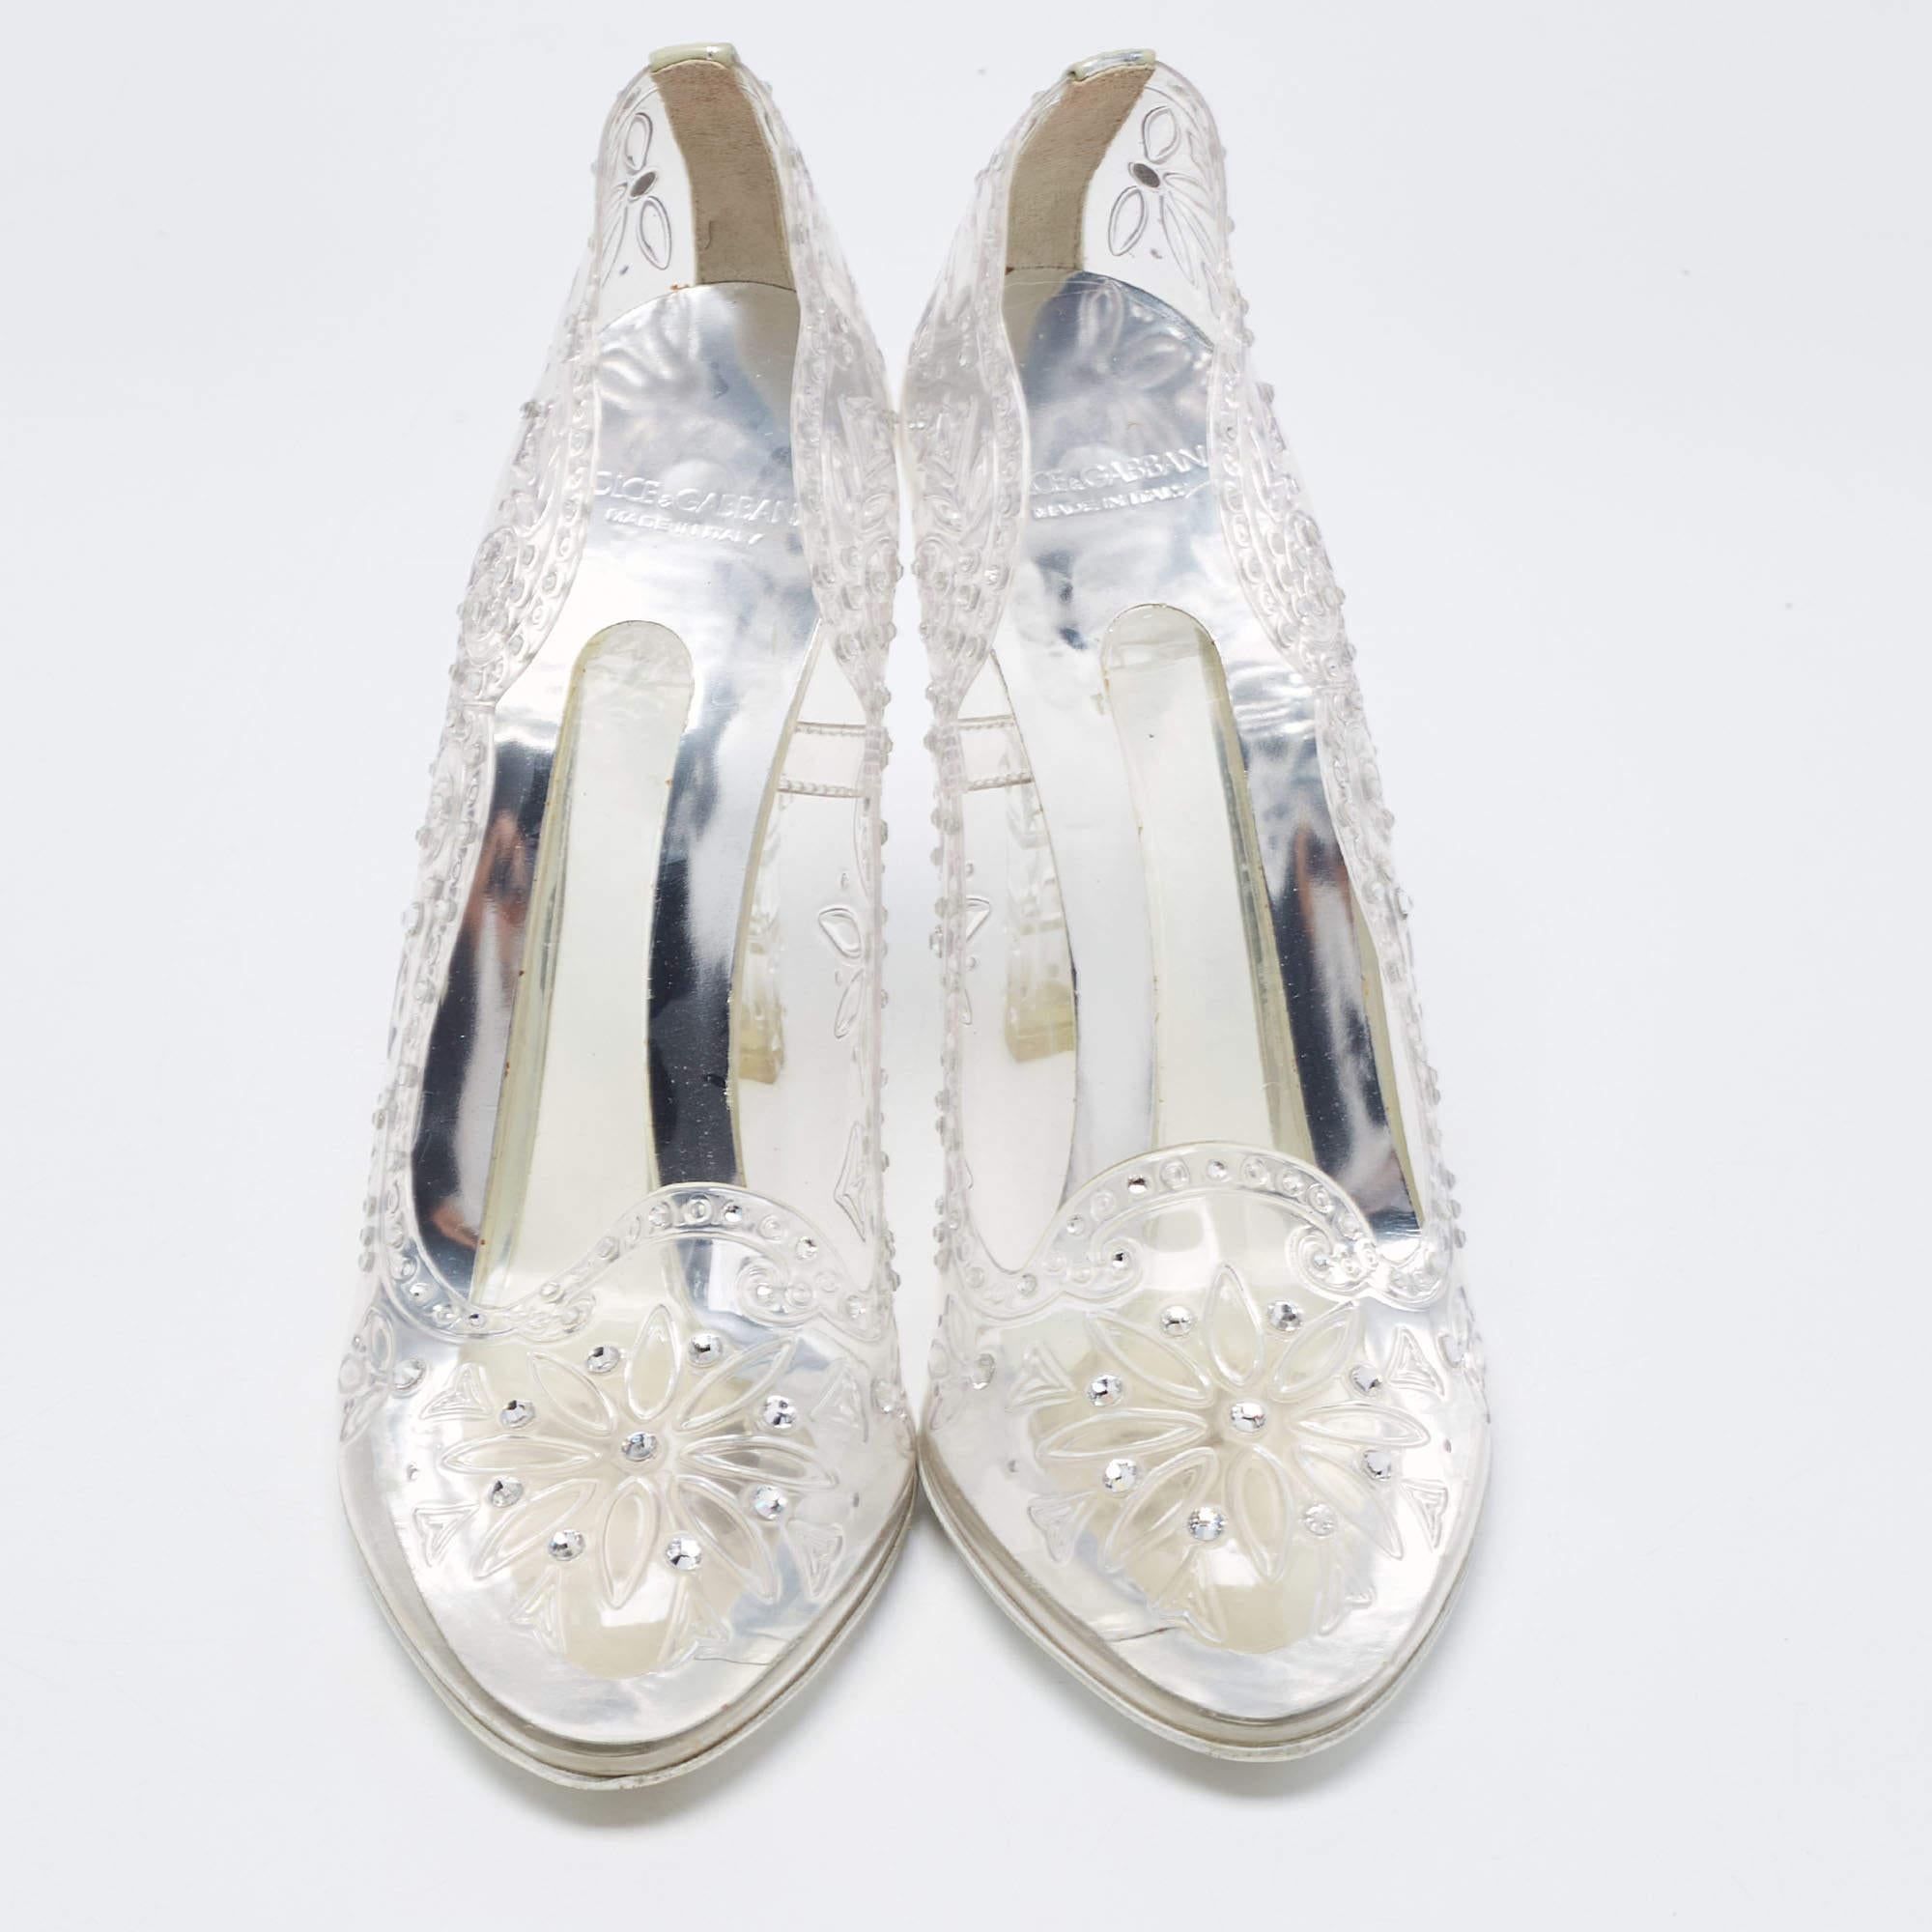 Bringing fairytale dreams to life, Dolce & Gabbana fashioned these Cinderella pumps using clear PVC and sprinkled dazzling crystals around the floral-patterned exterior. The dreamy pumps have insoles lined with leather and they stand tall on 11cm